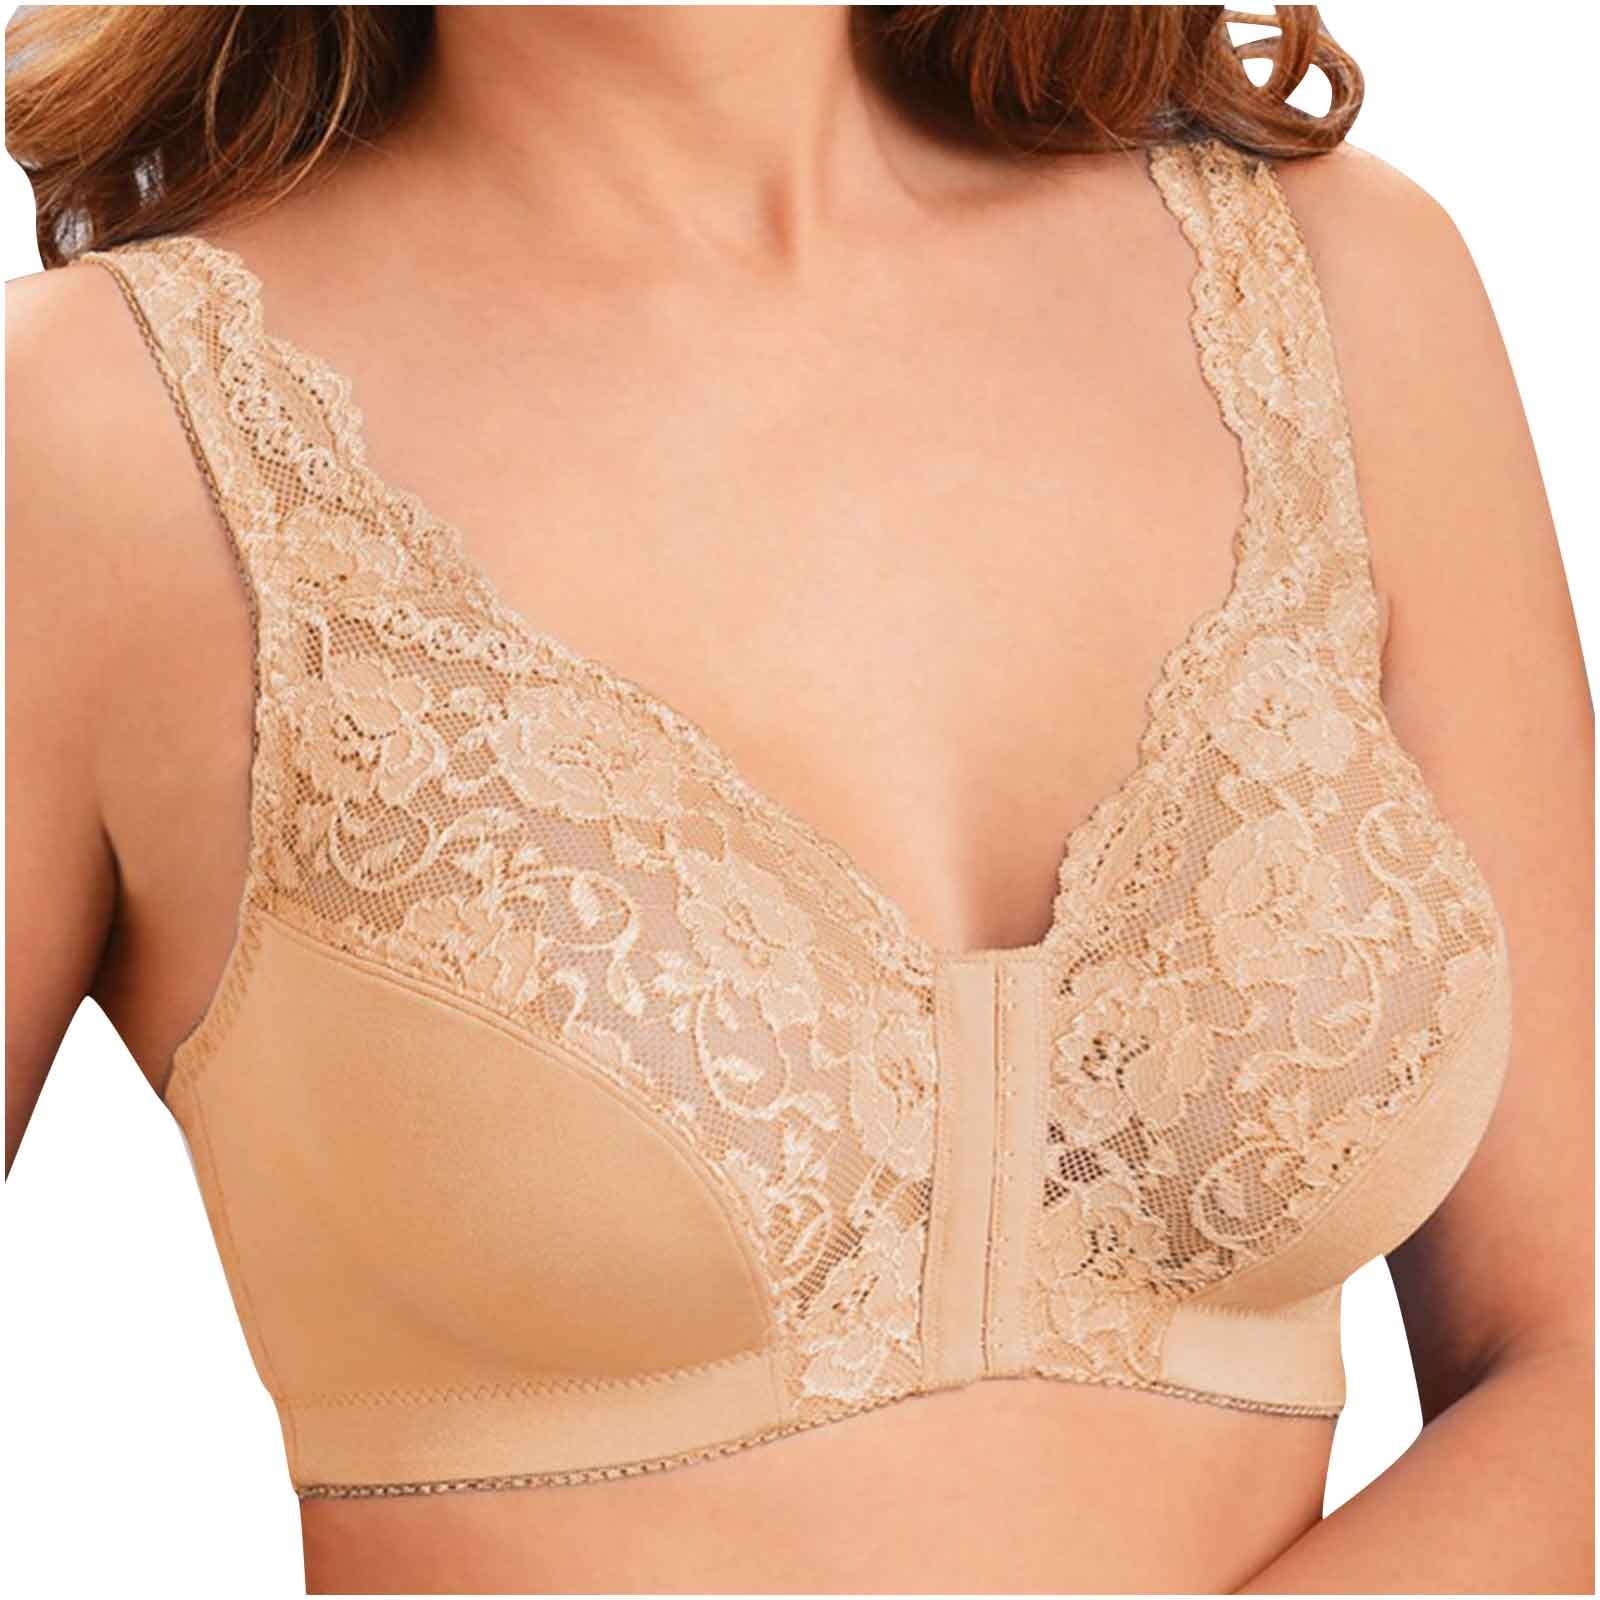 HAPIMO Everyday Bras for Women Comfort Daily Brassiere Stretch Underwear  Seamless Push Up Lace Camisole Gathered Breathable Base Soft Ultra Light